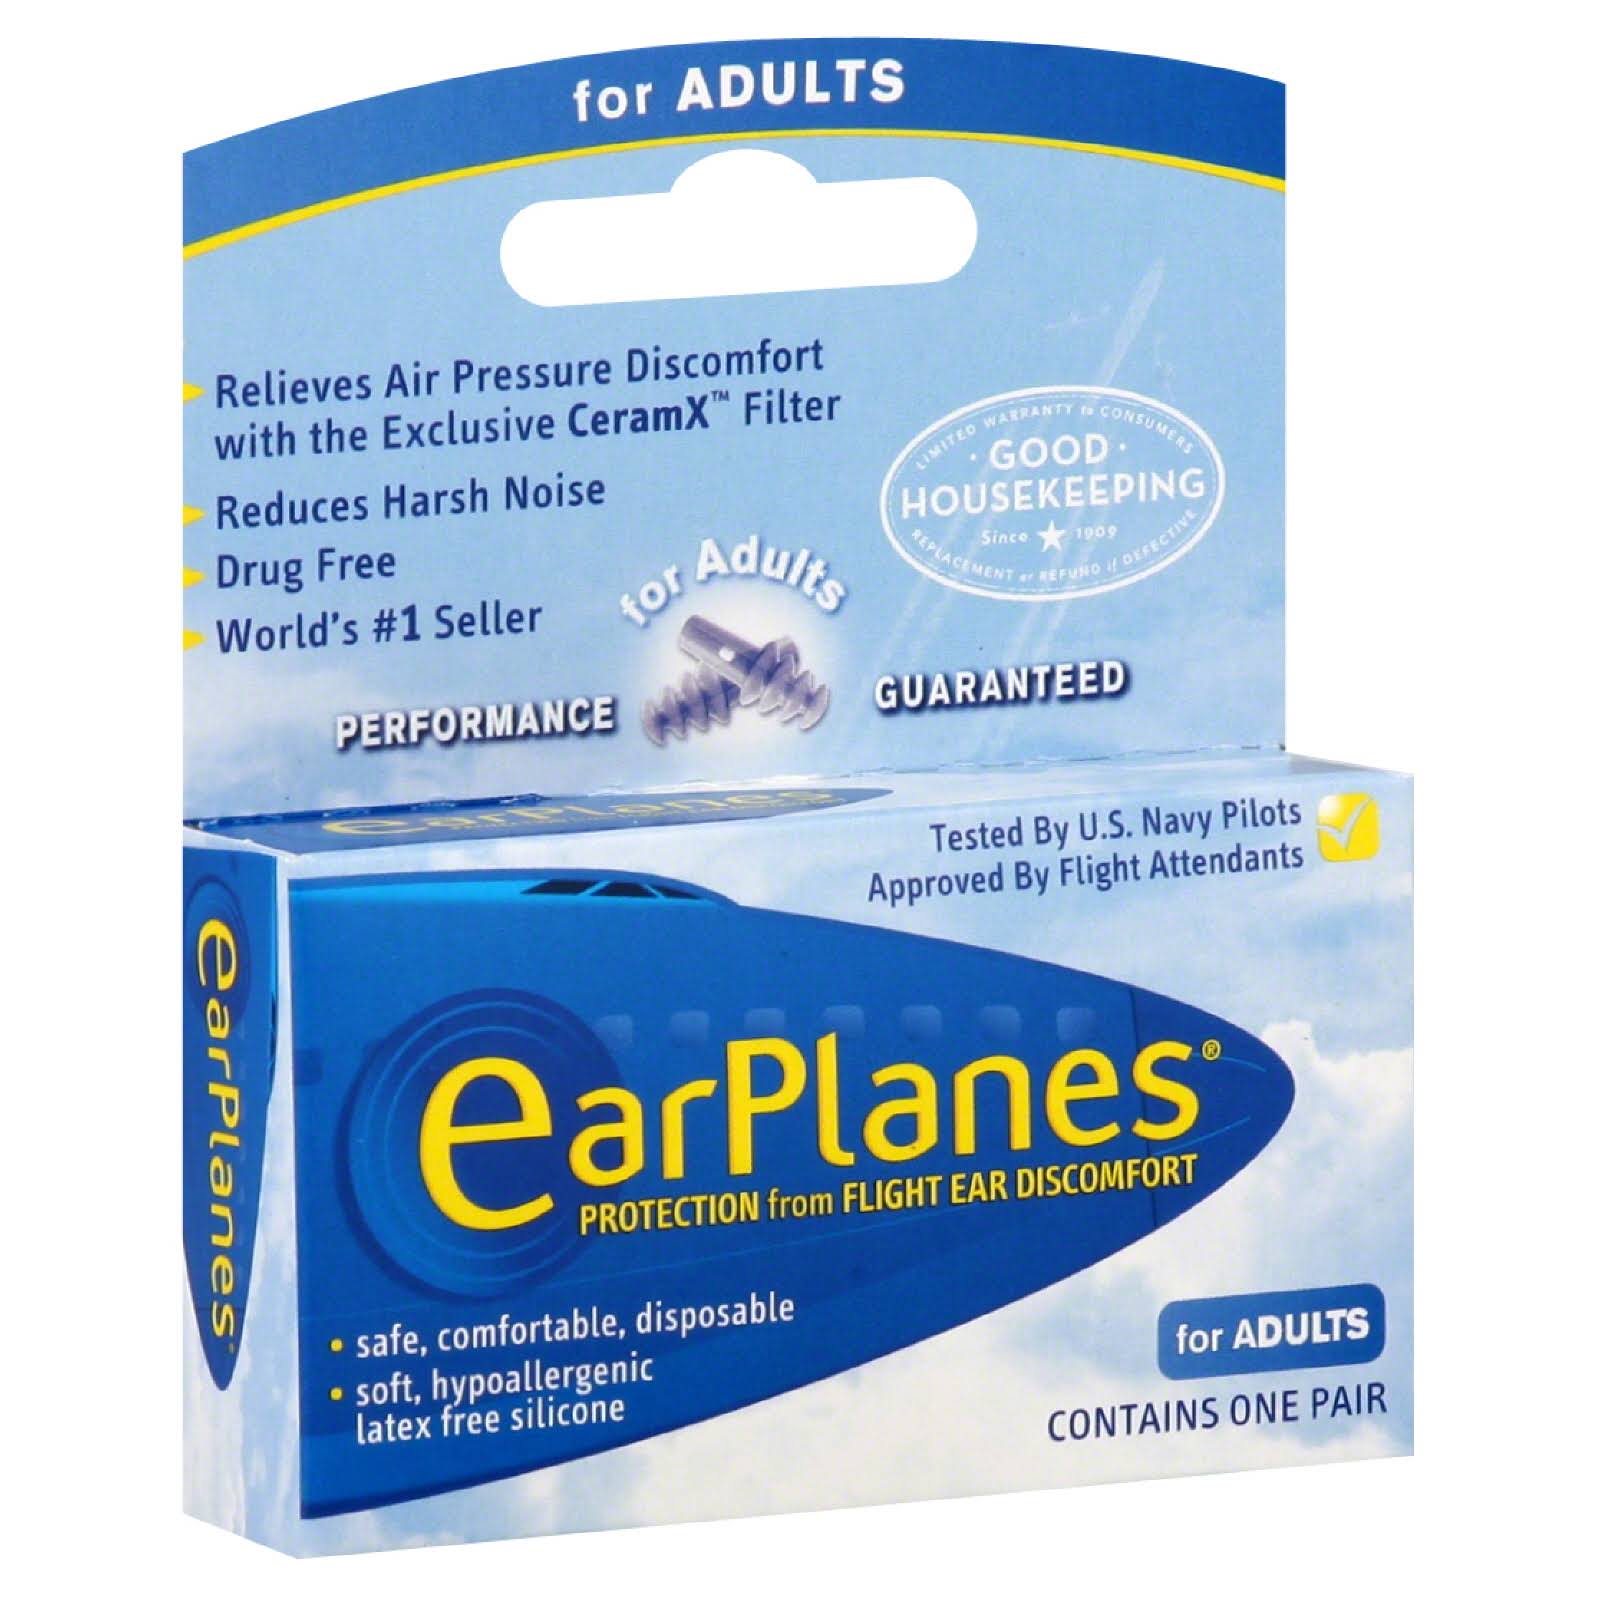 Earplanes Protection From Flight Ear Discomfort - 1 Pair, Adult